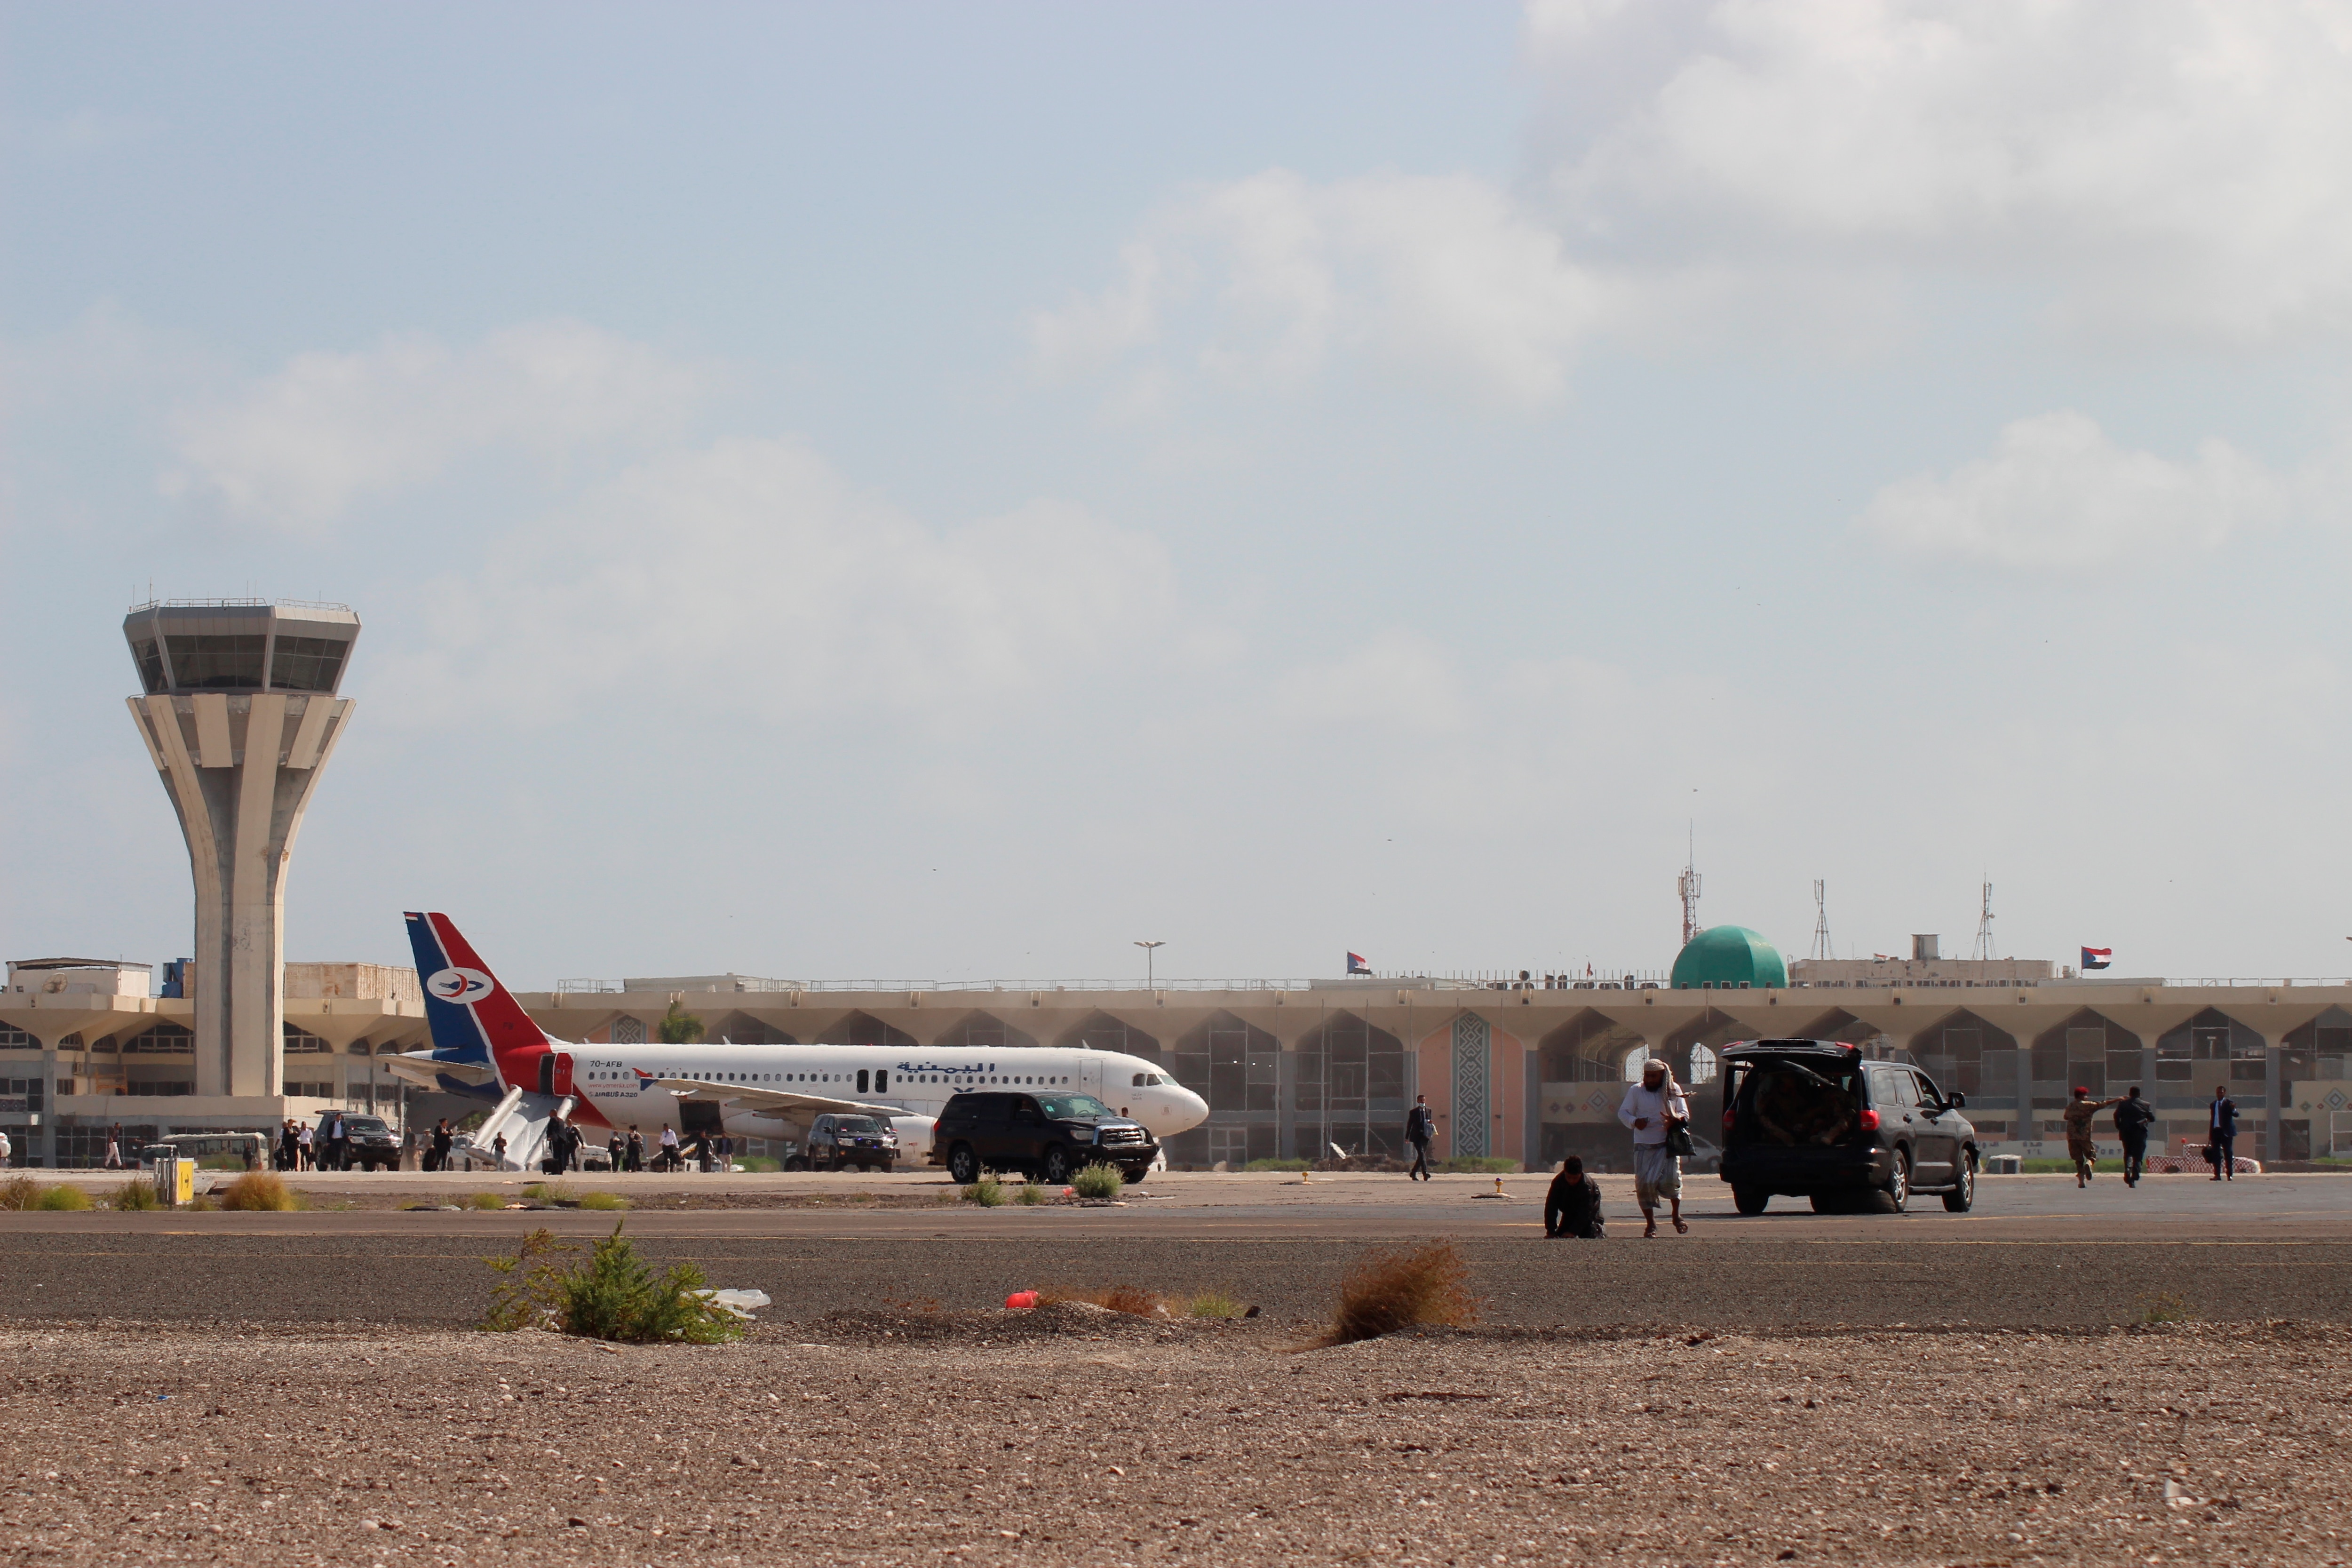 Bystanders stand near the runway of Aden airport shortly after the explosion.